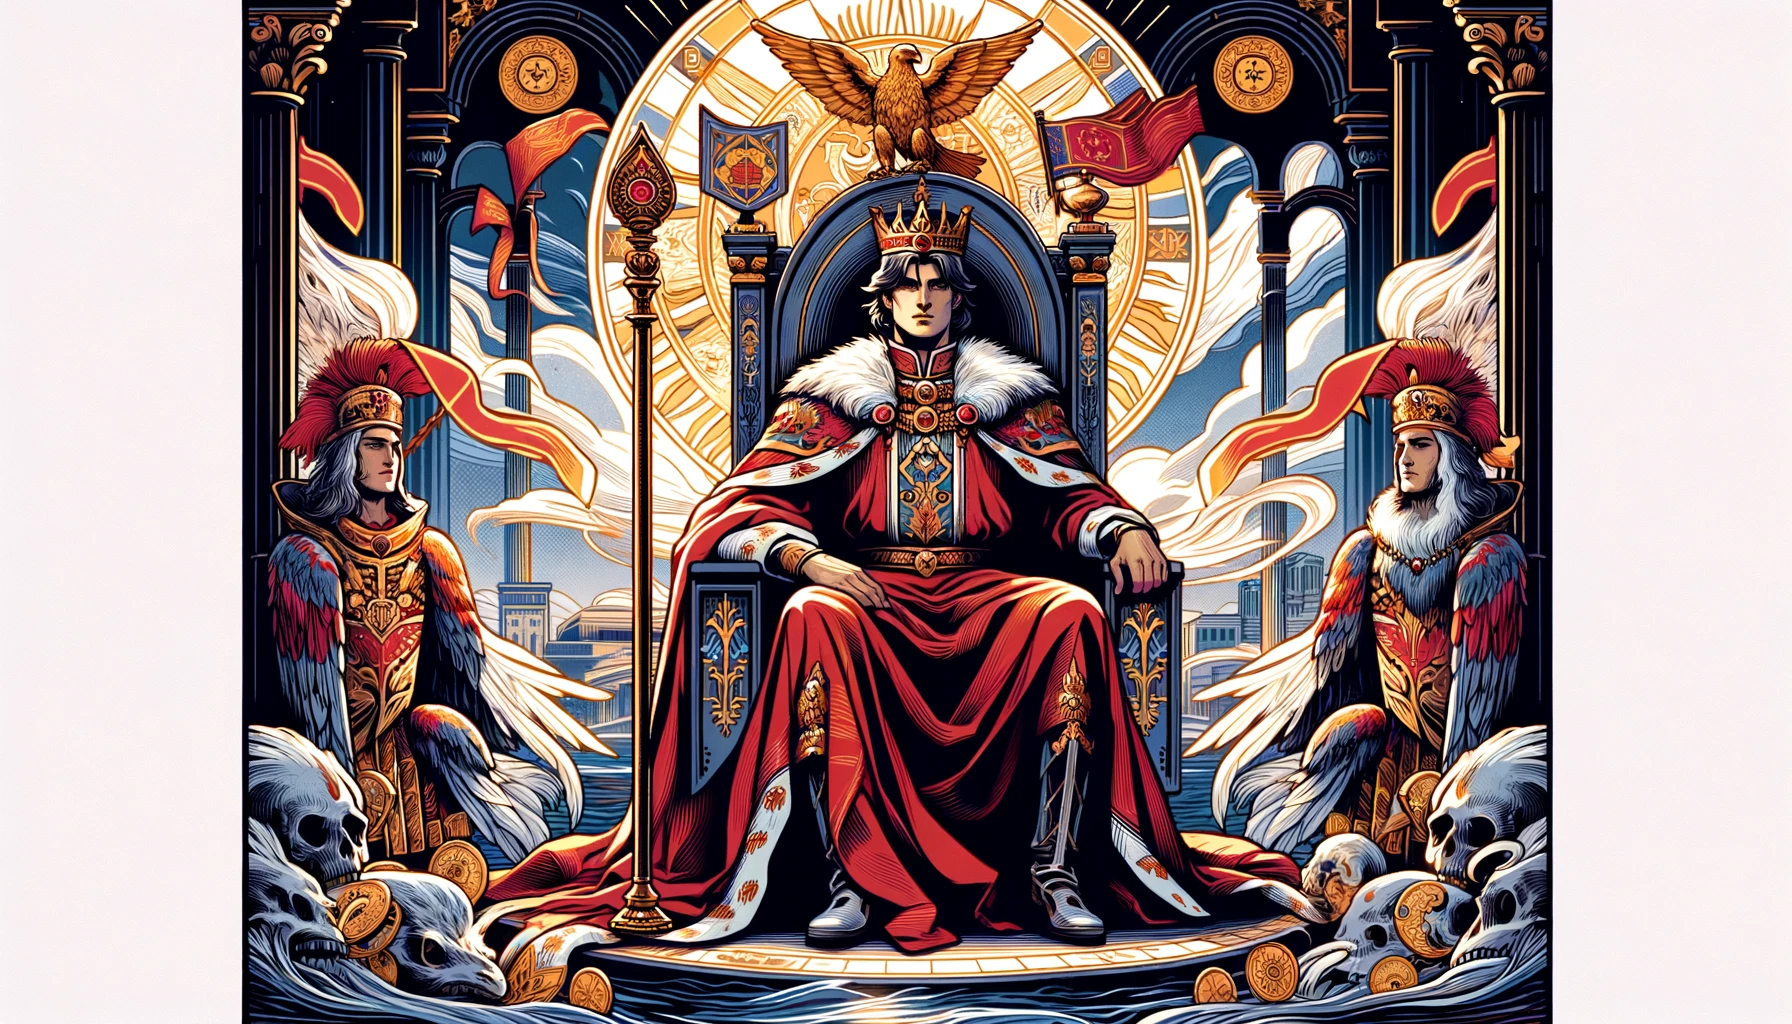 "A commanding figure, possibly seated on a throne, embodying The Emperor's energy with strength, decisiveness, and a protective nature, surrounded by symbols of power reflecting the card's themes of authority and governance."